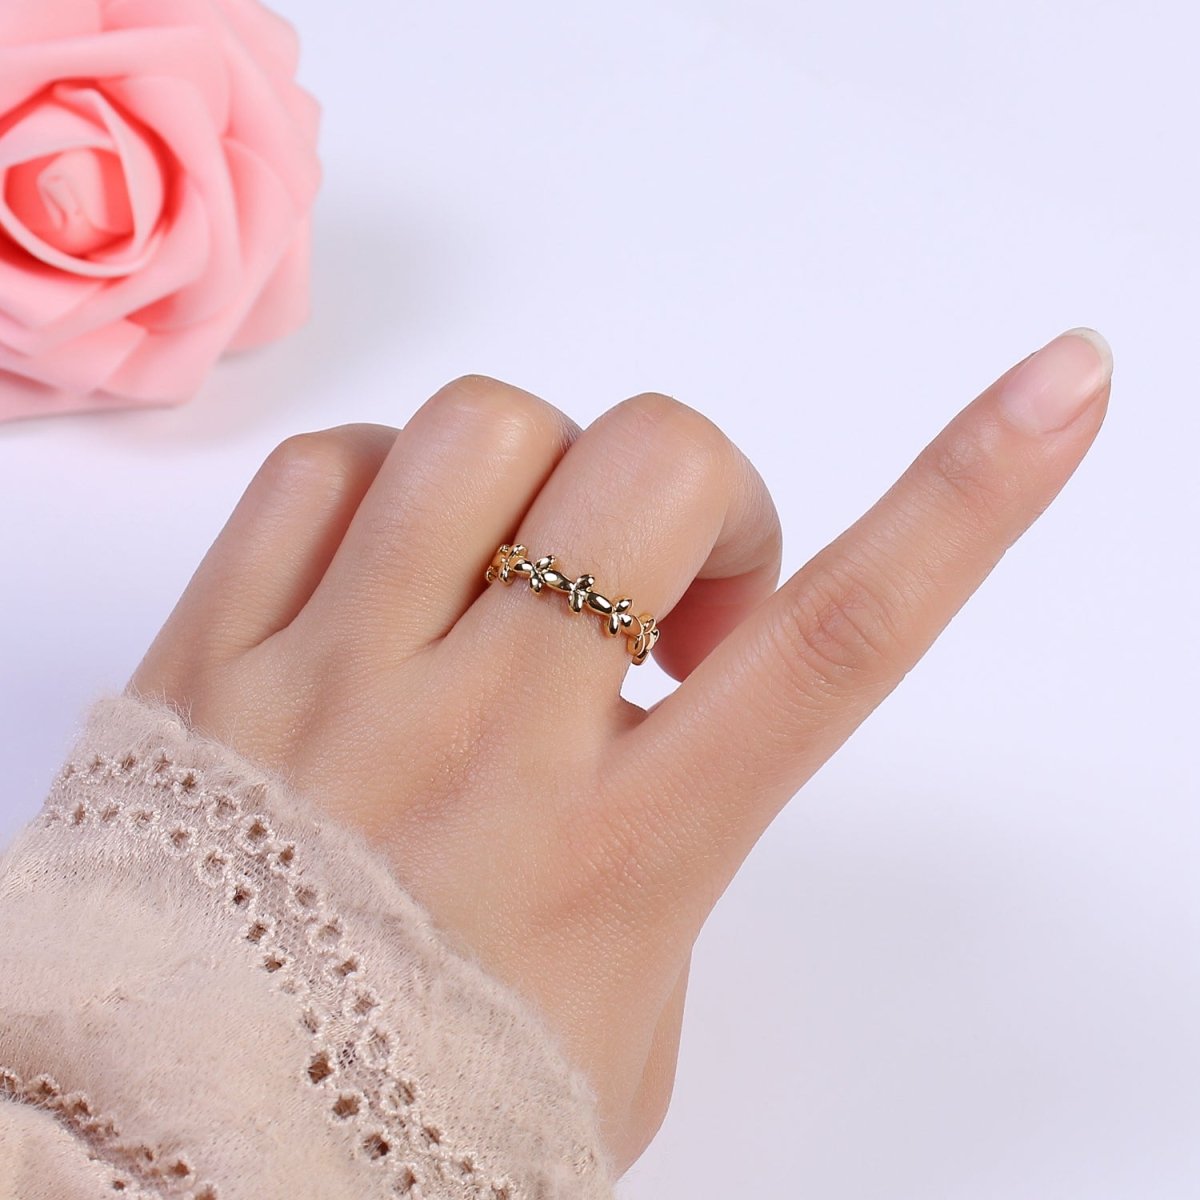 Minimalist 24K Gold Filled Geometric Abstract Bubble Adjustable Ring S-362 - DLUXCA